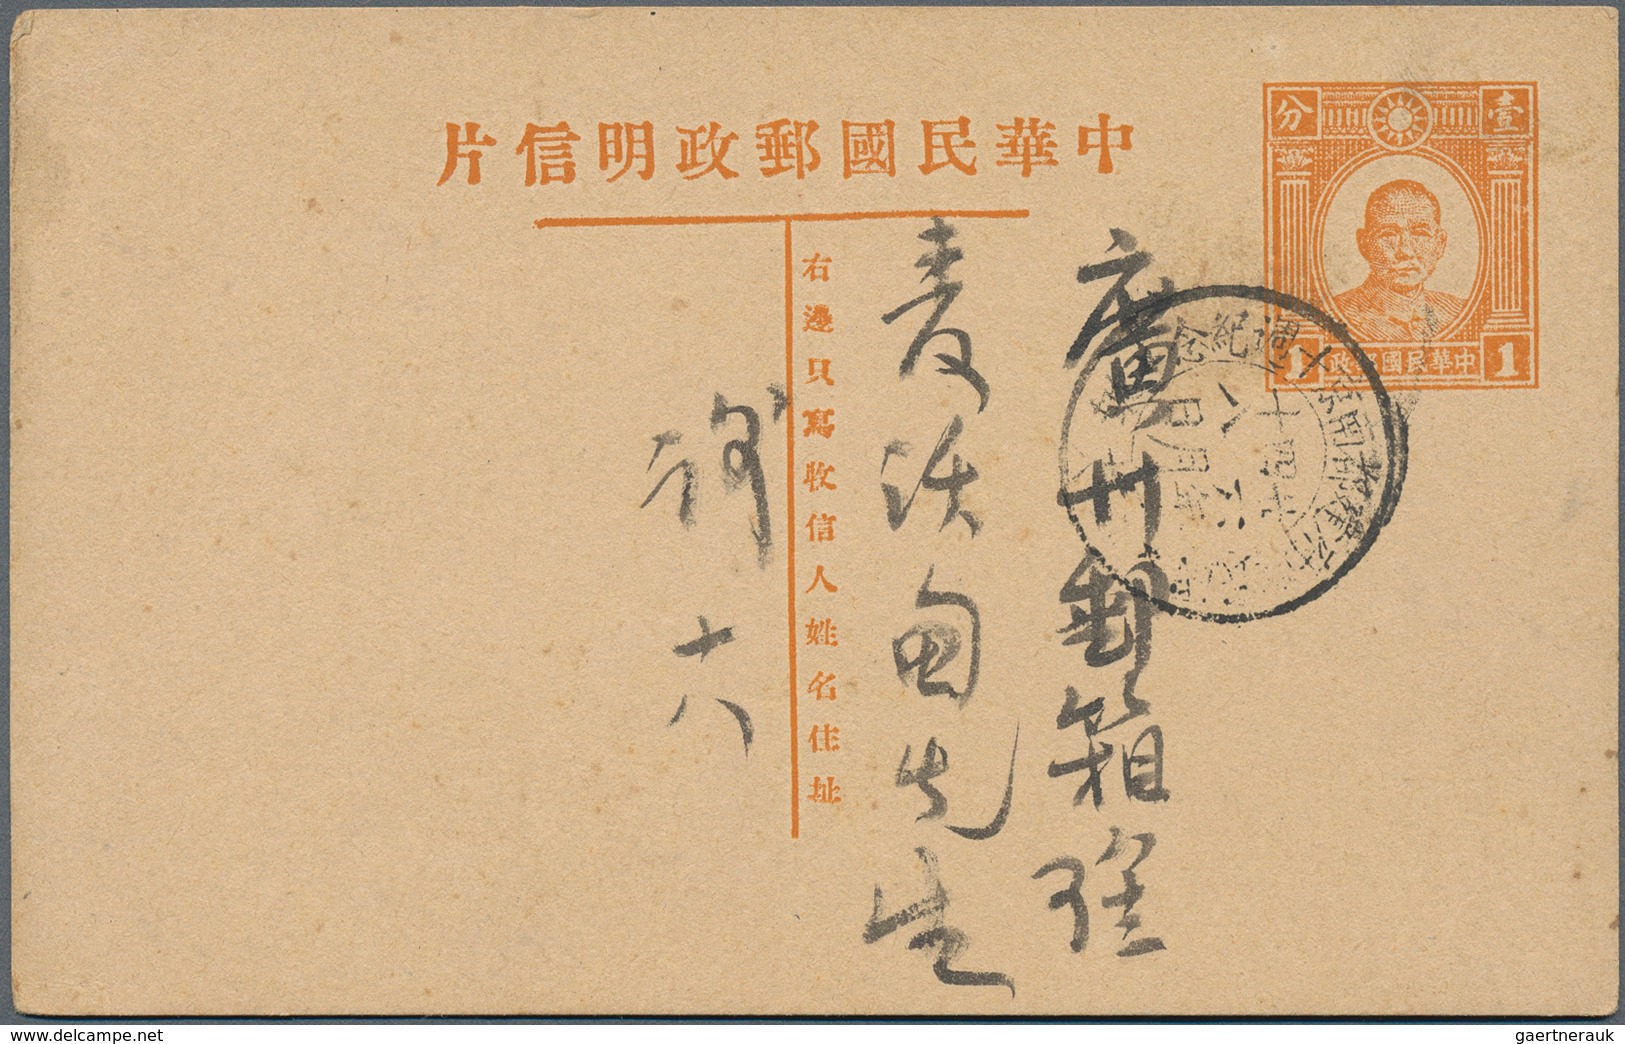 22399 China: 1923/38, covers (4 inc. 1/2 S. martyr on Nanking local cover with boxed 1934 commemorative pm